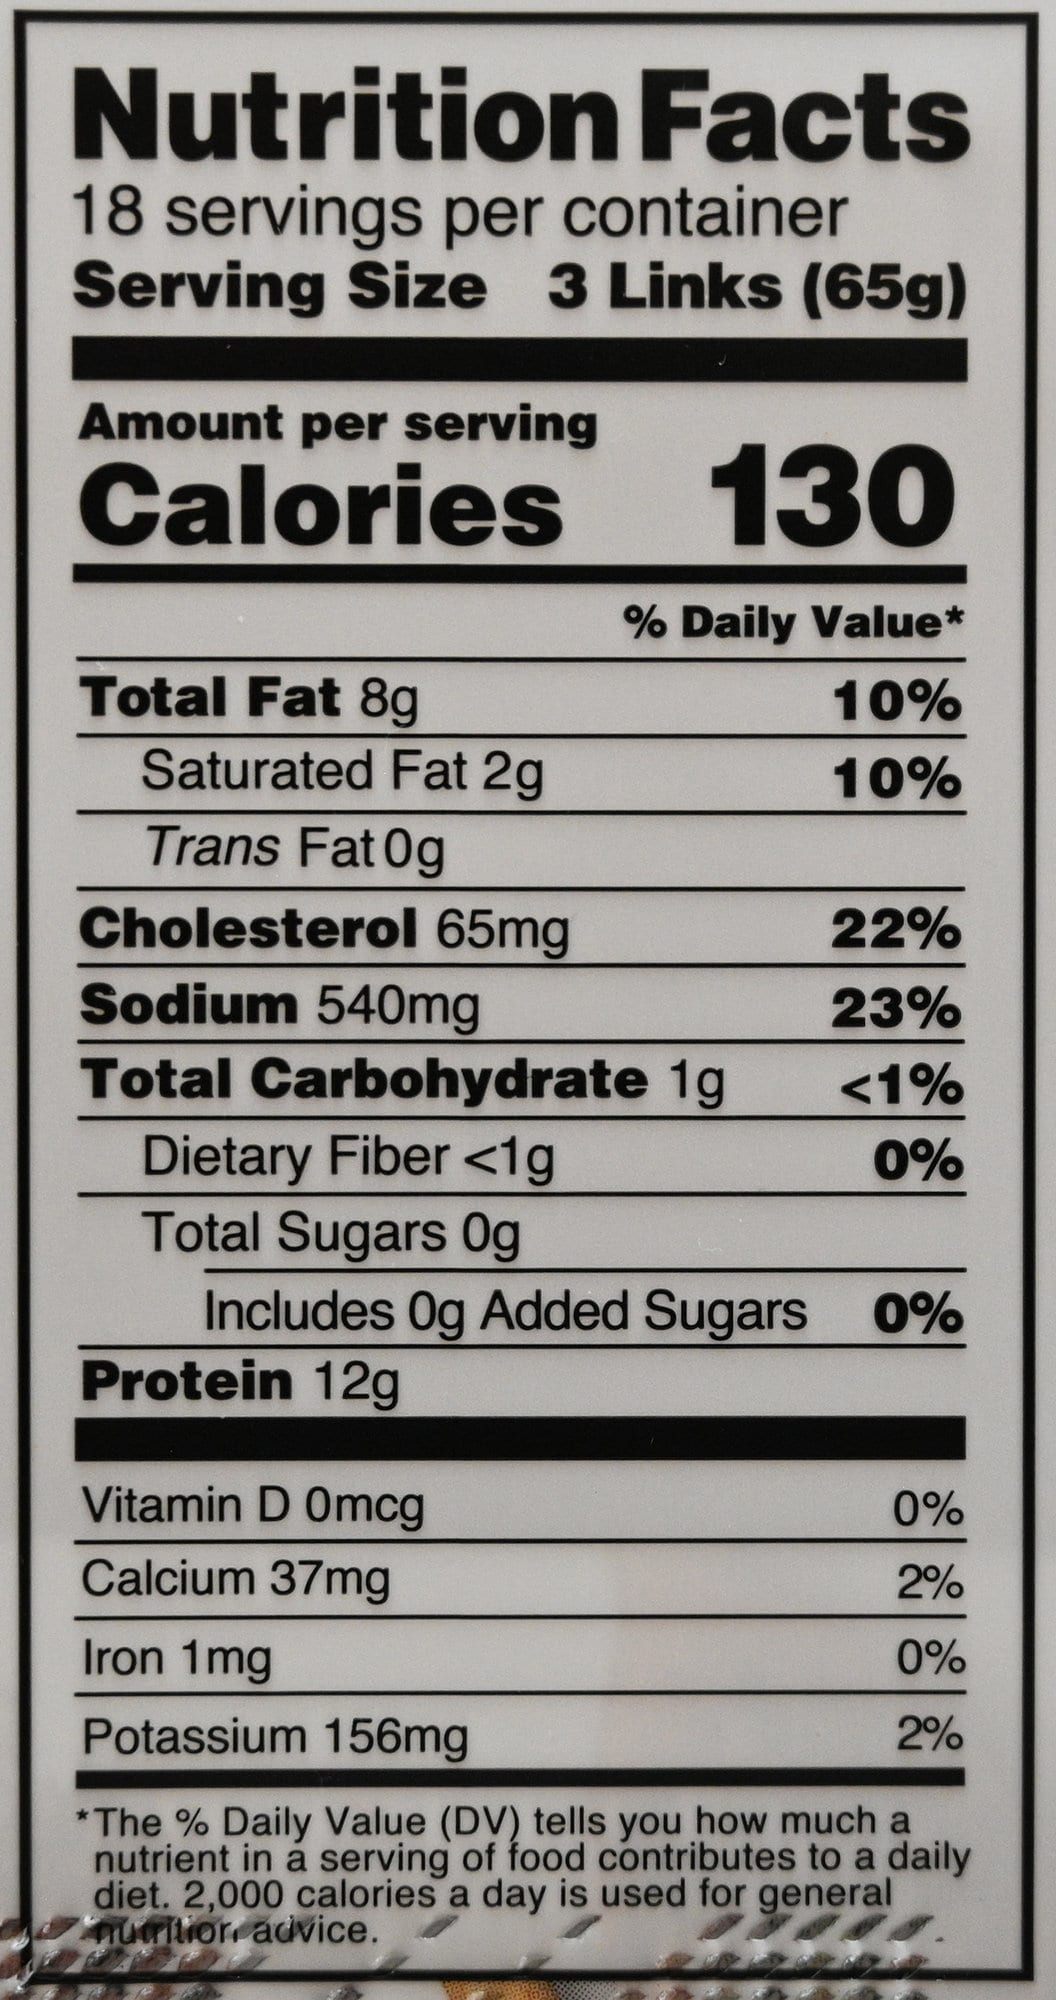 Image of the breakfast links nutrition facts from the back of the package.